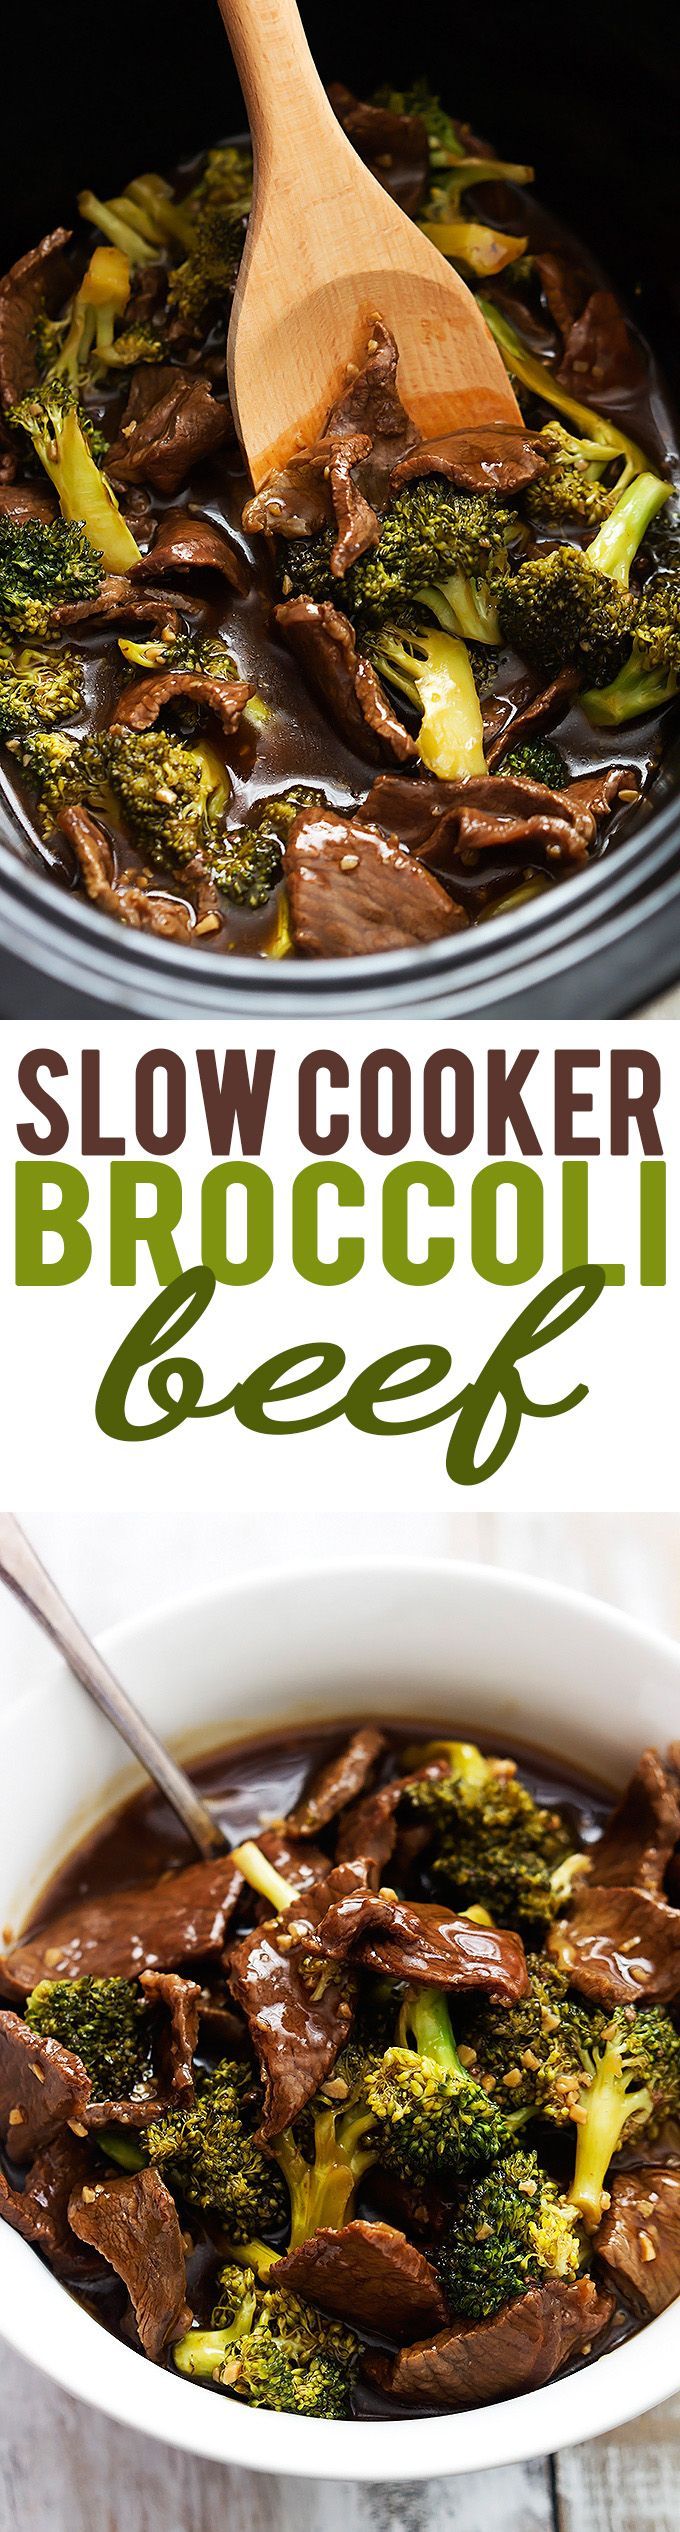 Super easy Slow Cooker Broccoli Beef! The sauce is AMAZING – so much better tasting and healthier than takeout!   | Creme de la